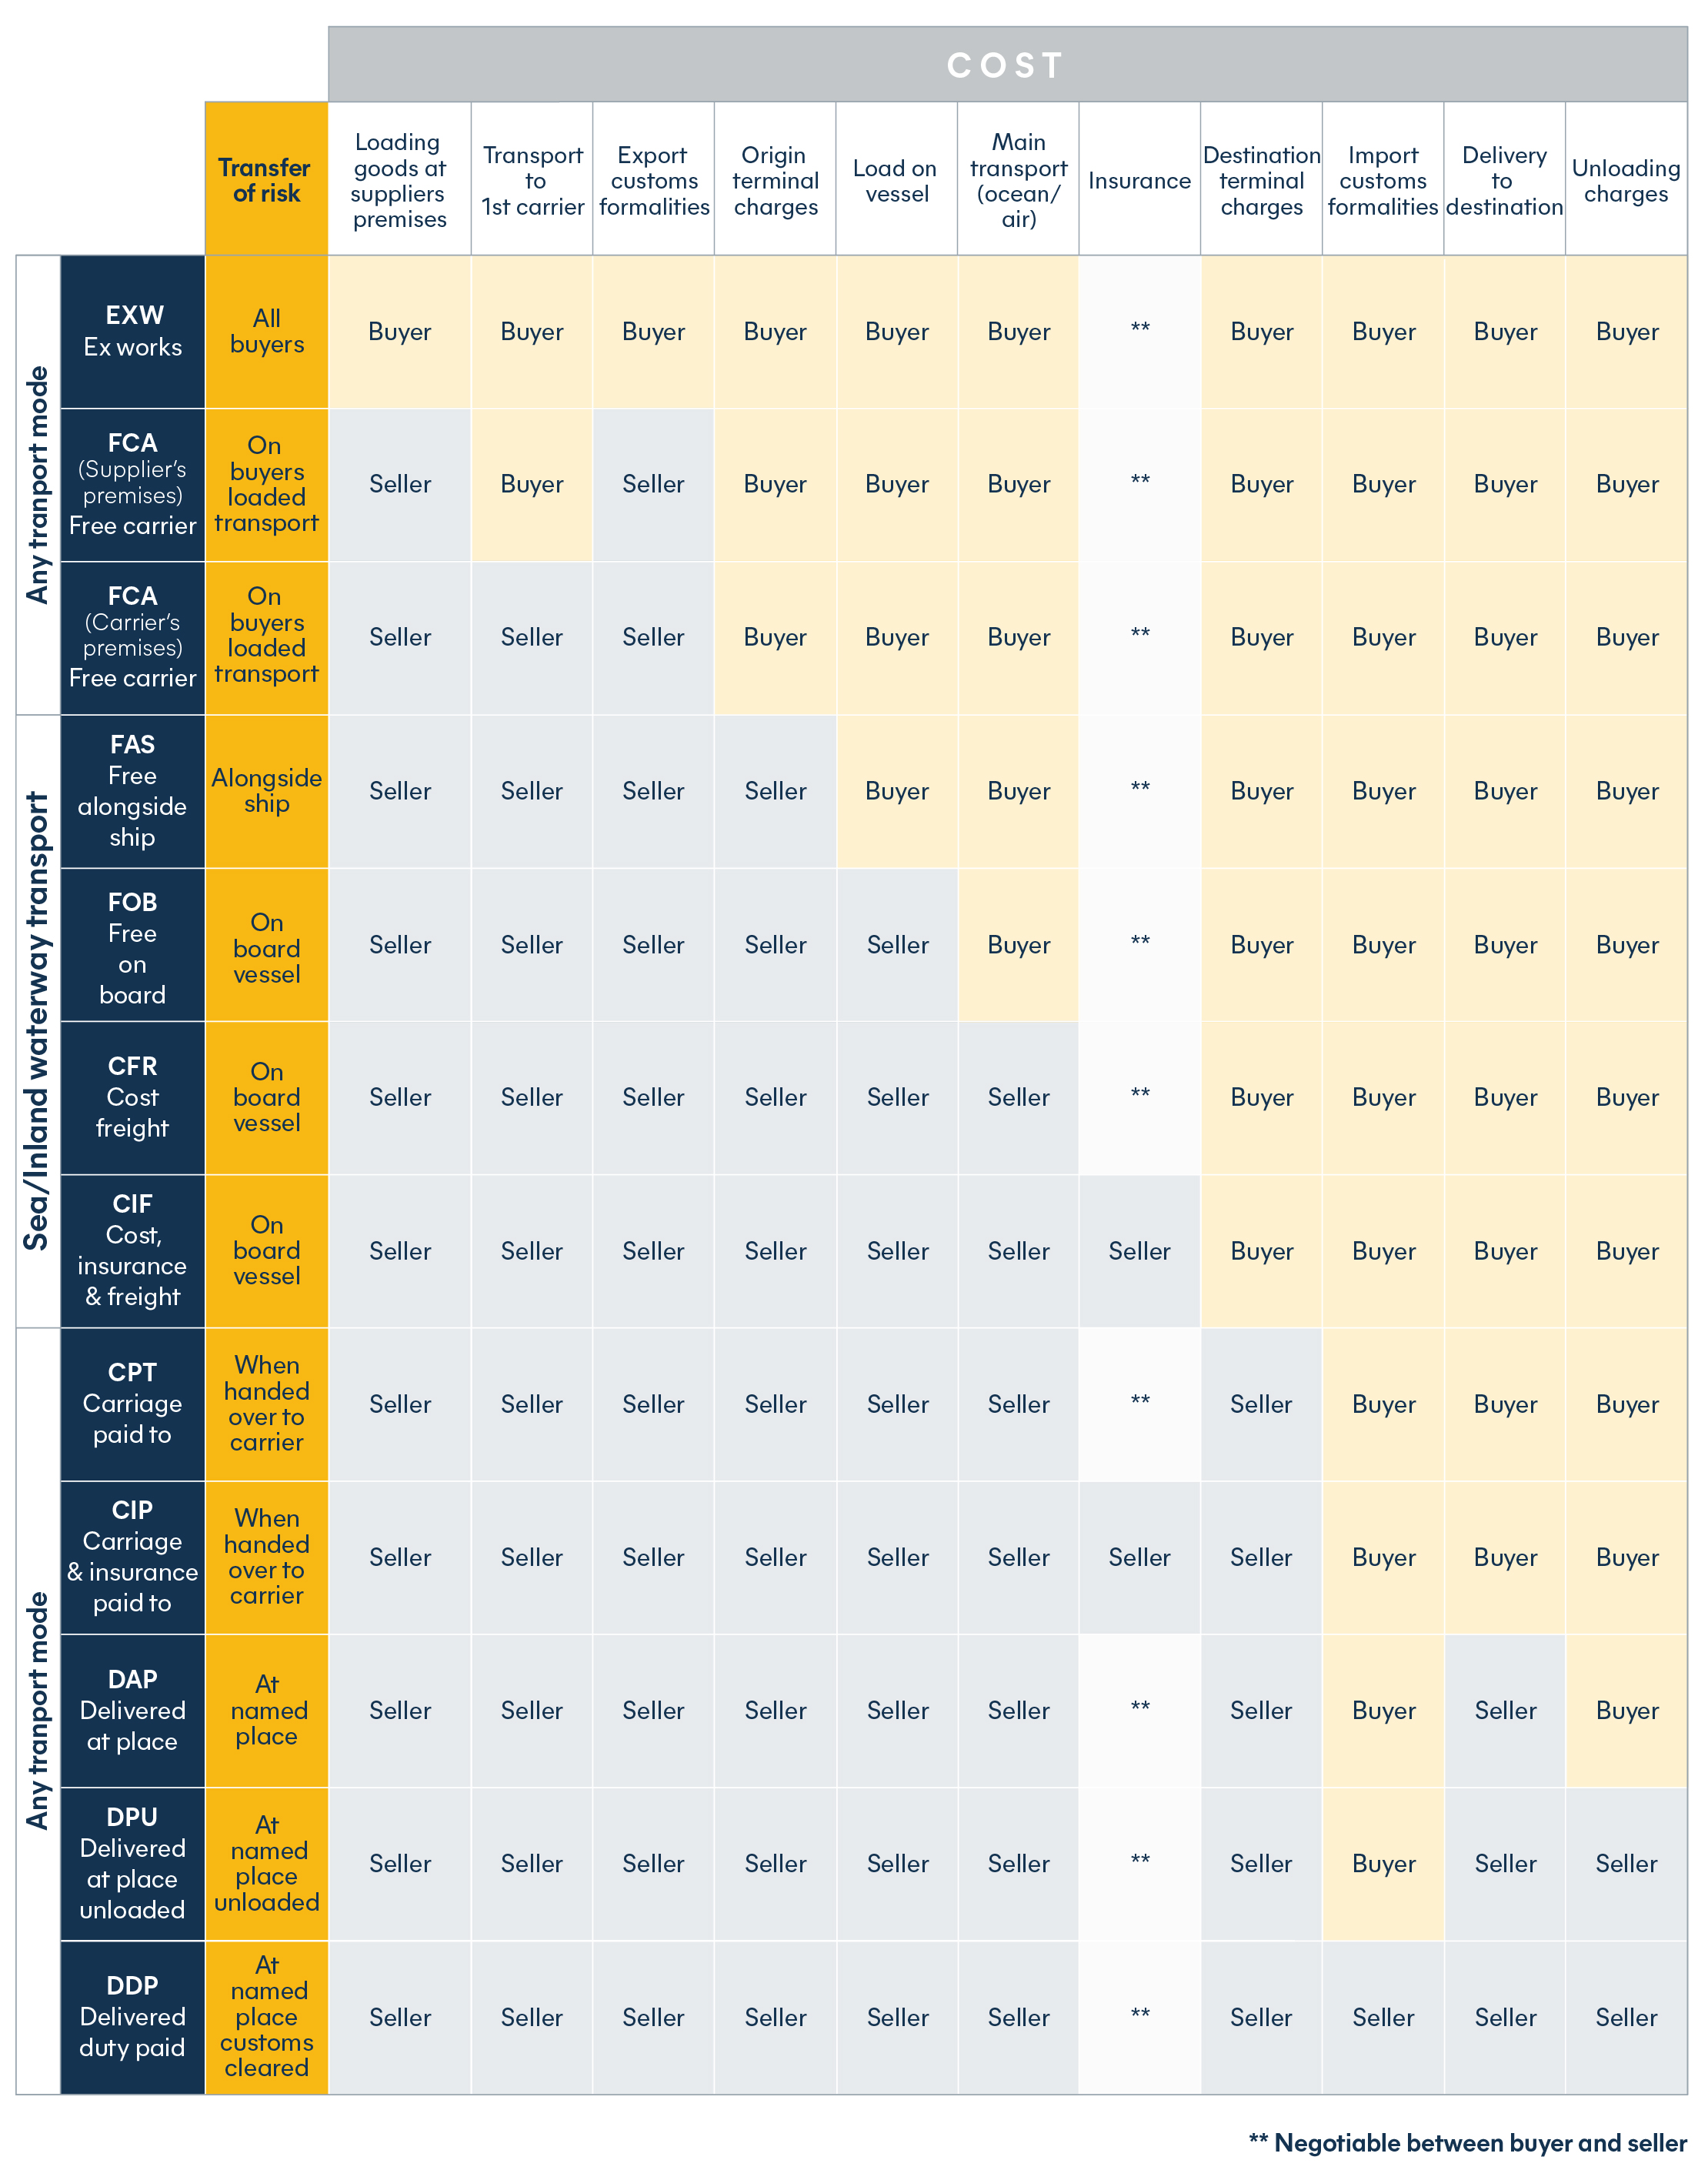 incoterms 2020 cost and transport mode